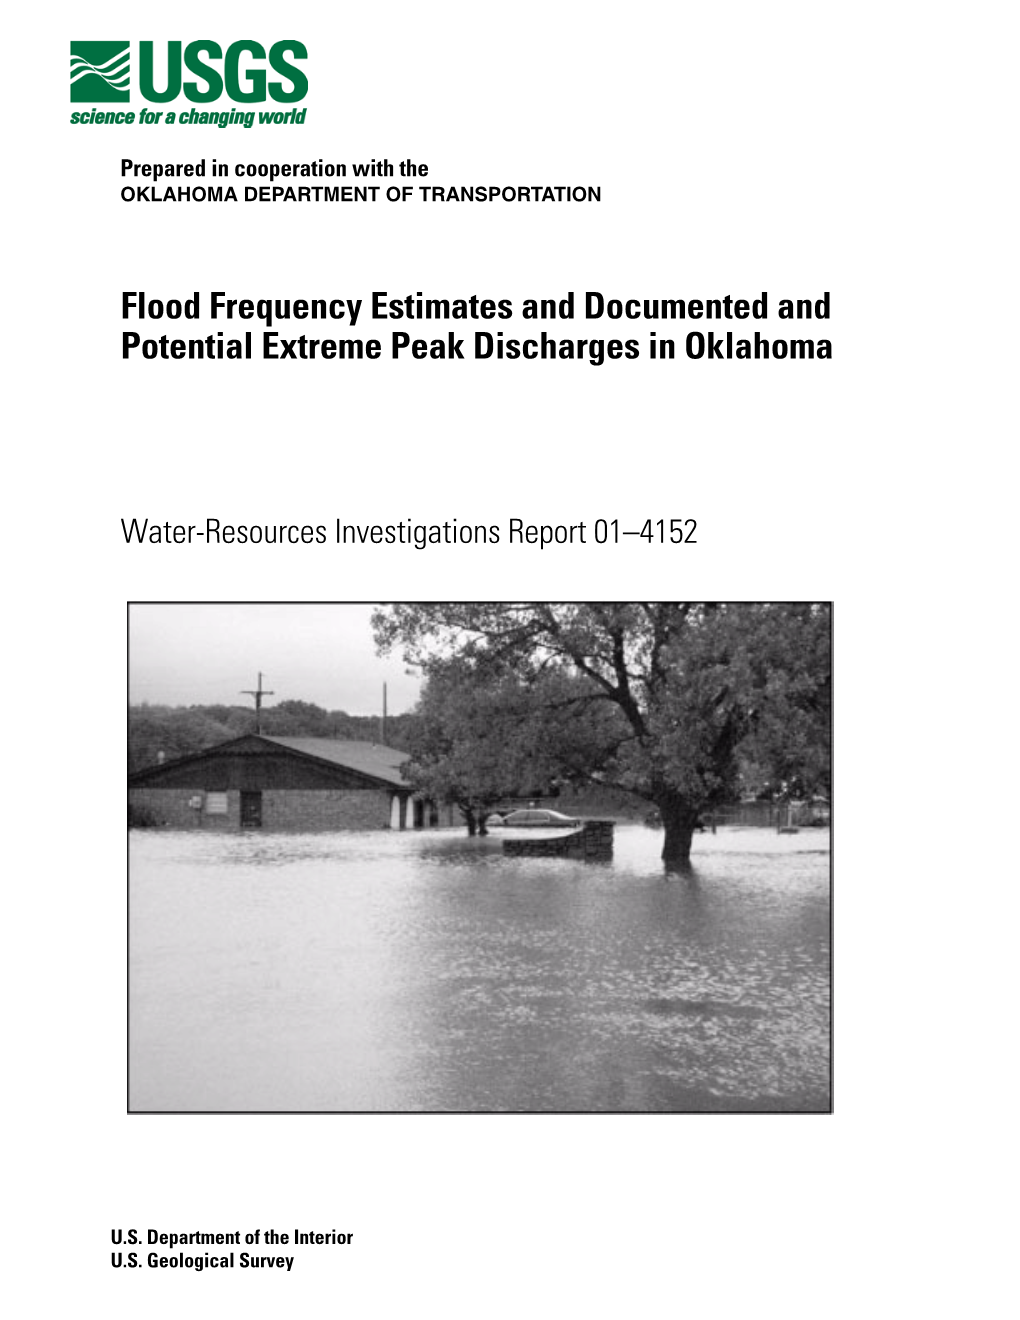 Flood Frequency Estimates and Documented and Potential Extreme Peak Discharges in Oklahoma